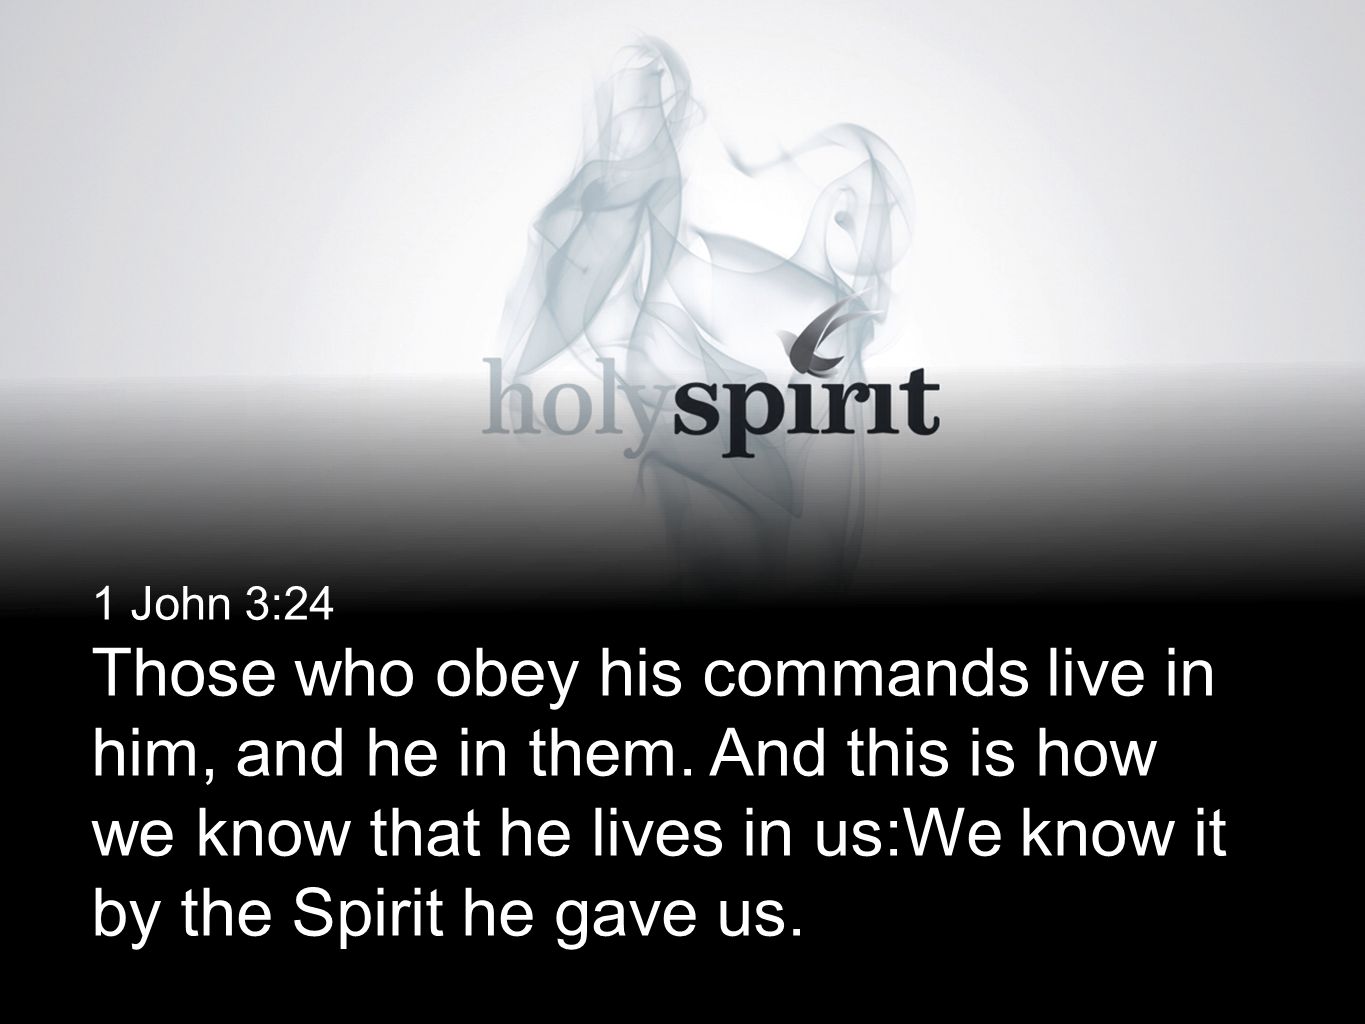 1 John 3:24 Those who obey his commands live in him, and he in them.